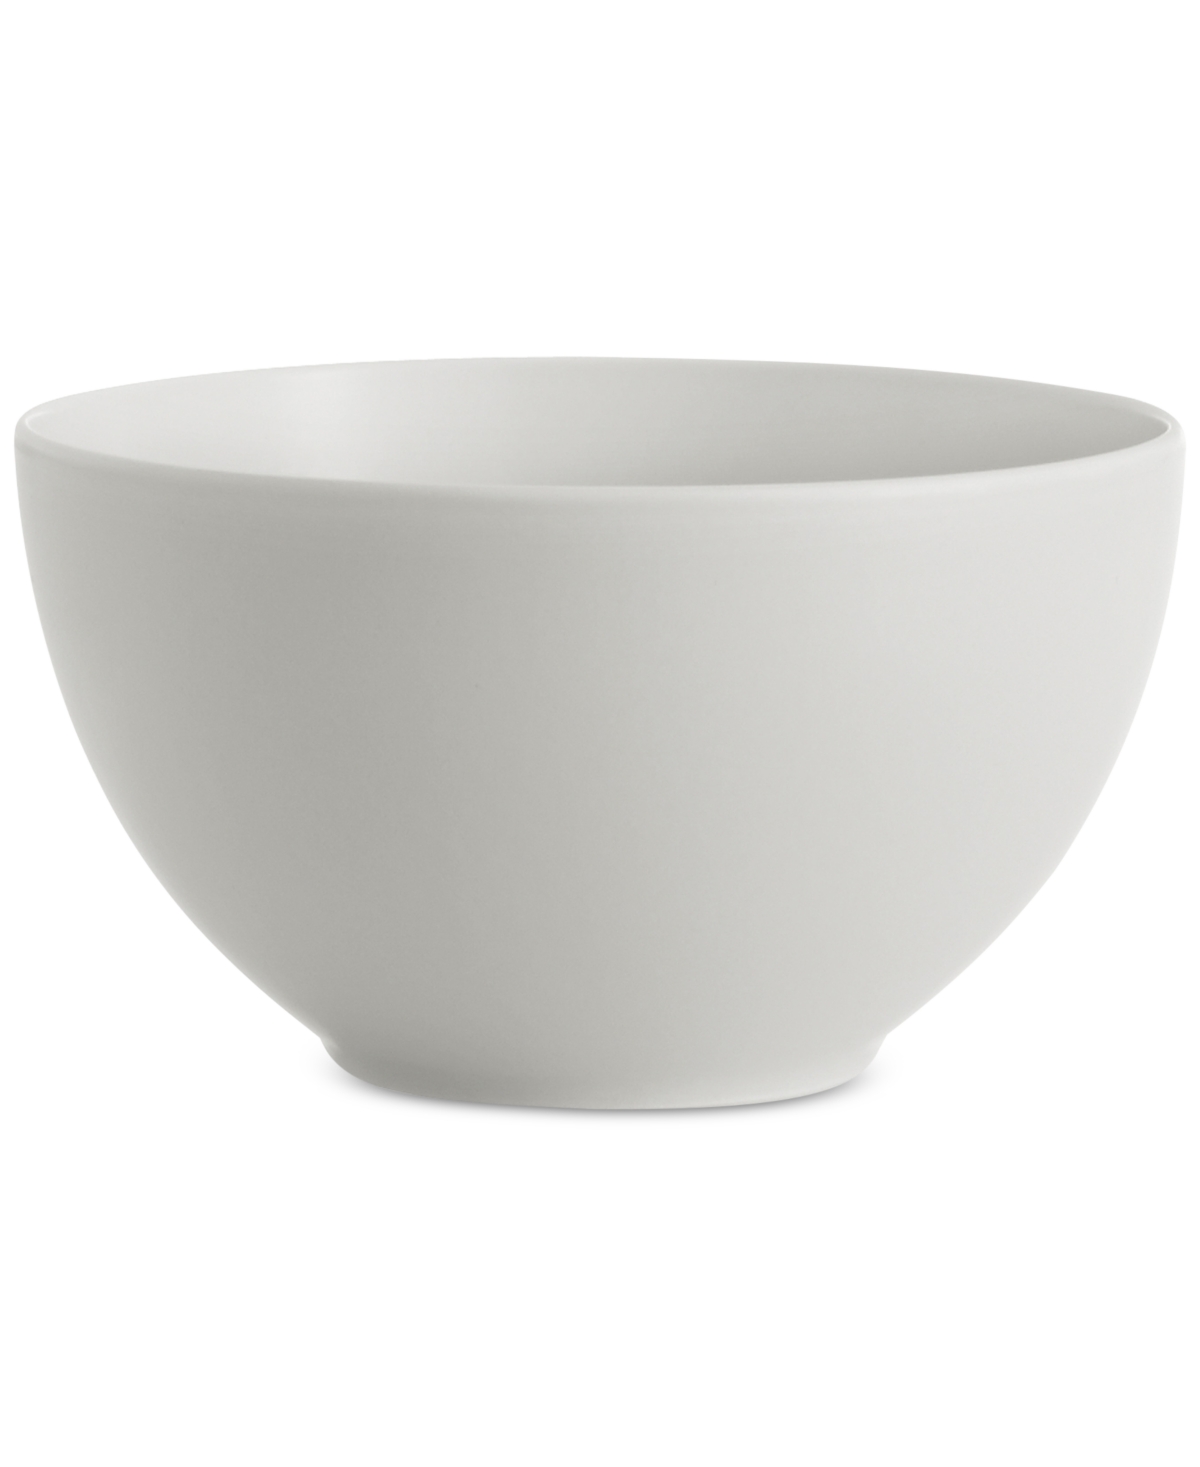 Pop Collection by Robin Levien All-Purpose Bowl - Chalk